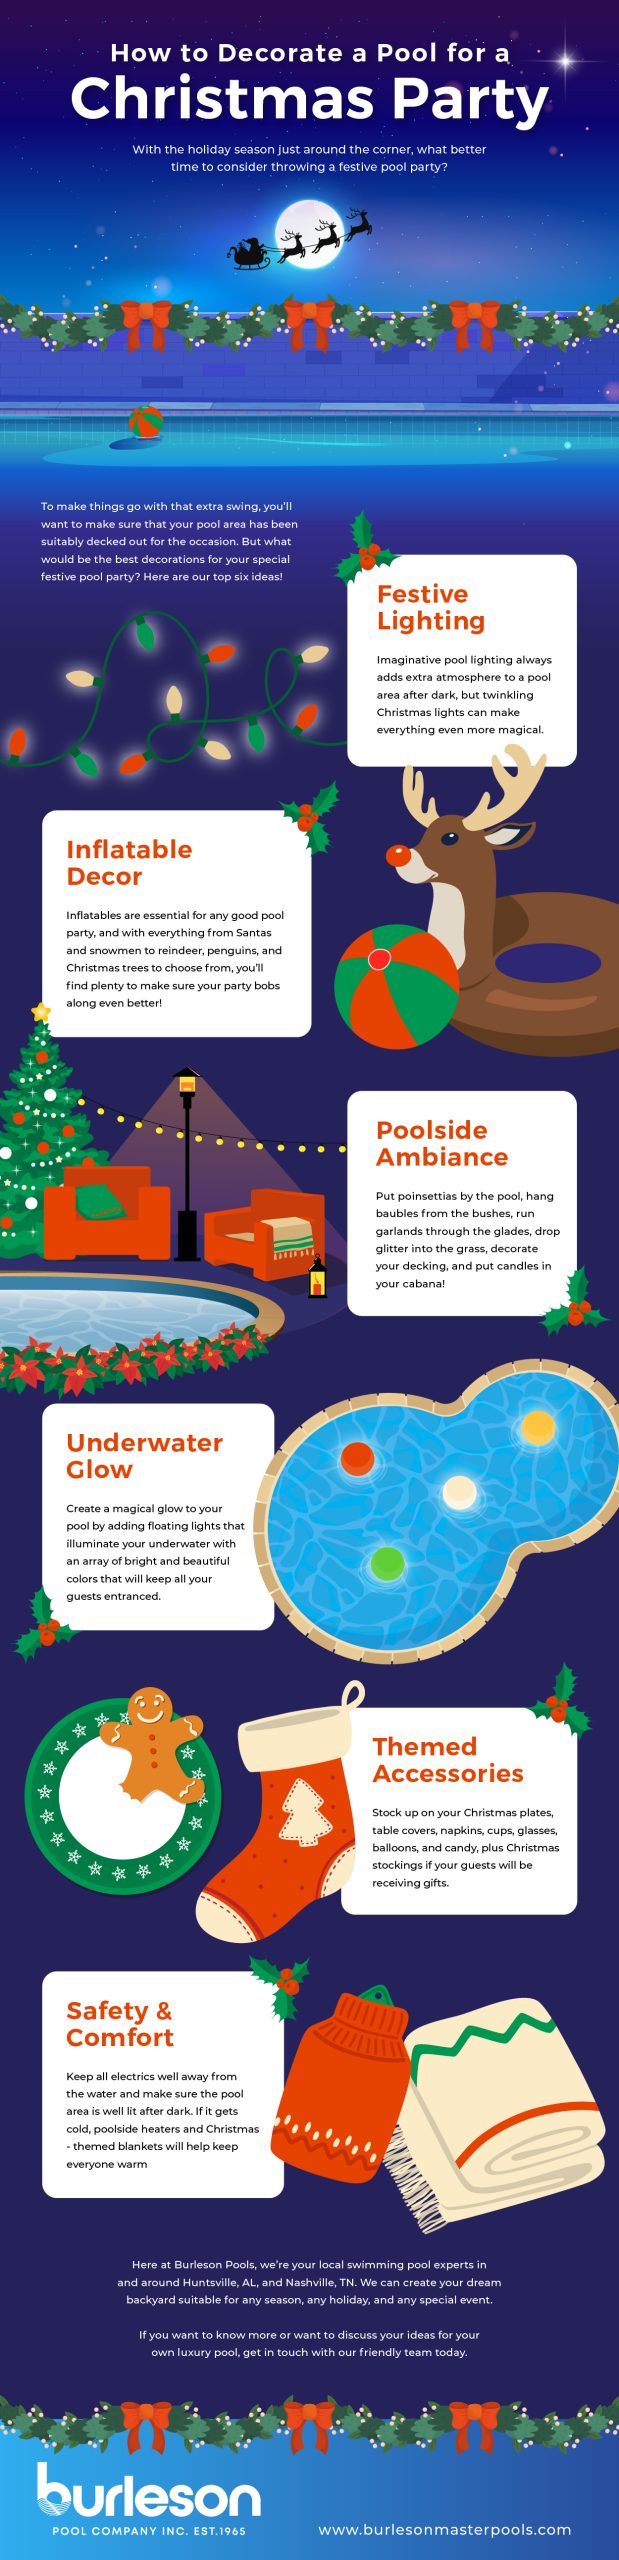 How to Decorate a Pool for a Christmas Party - Infographic